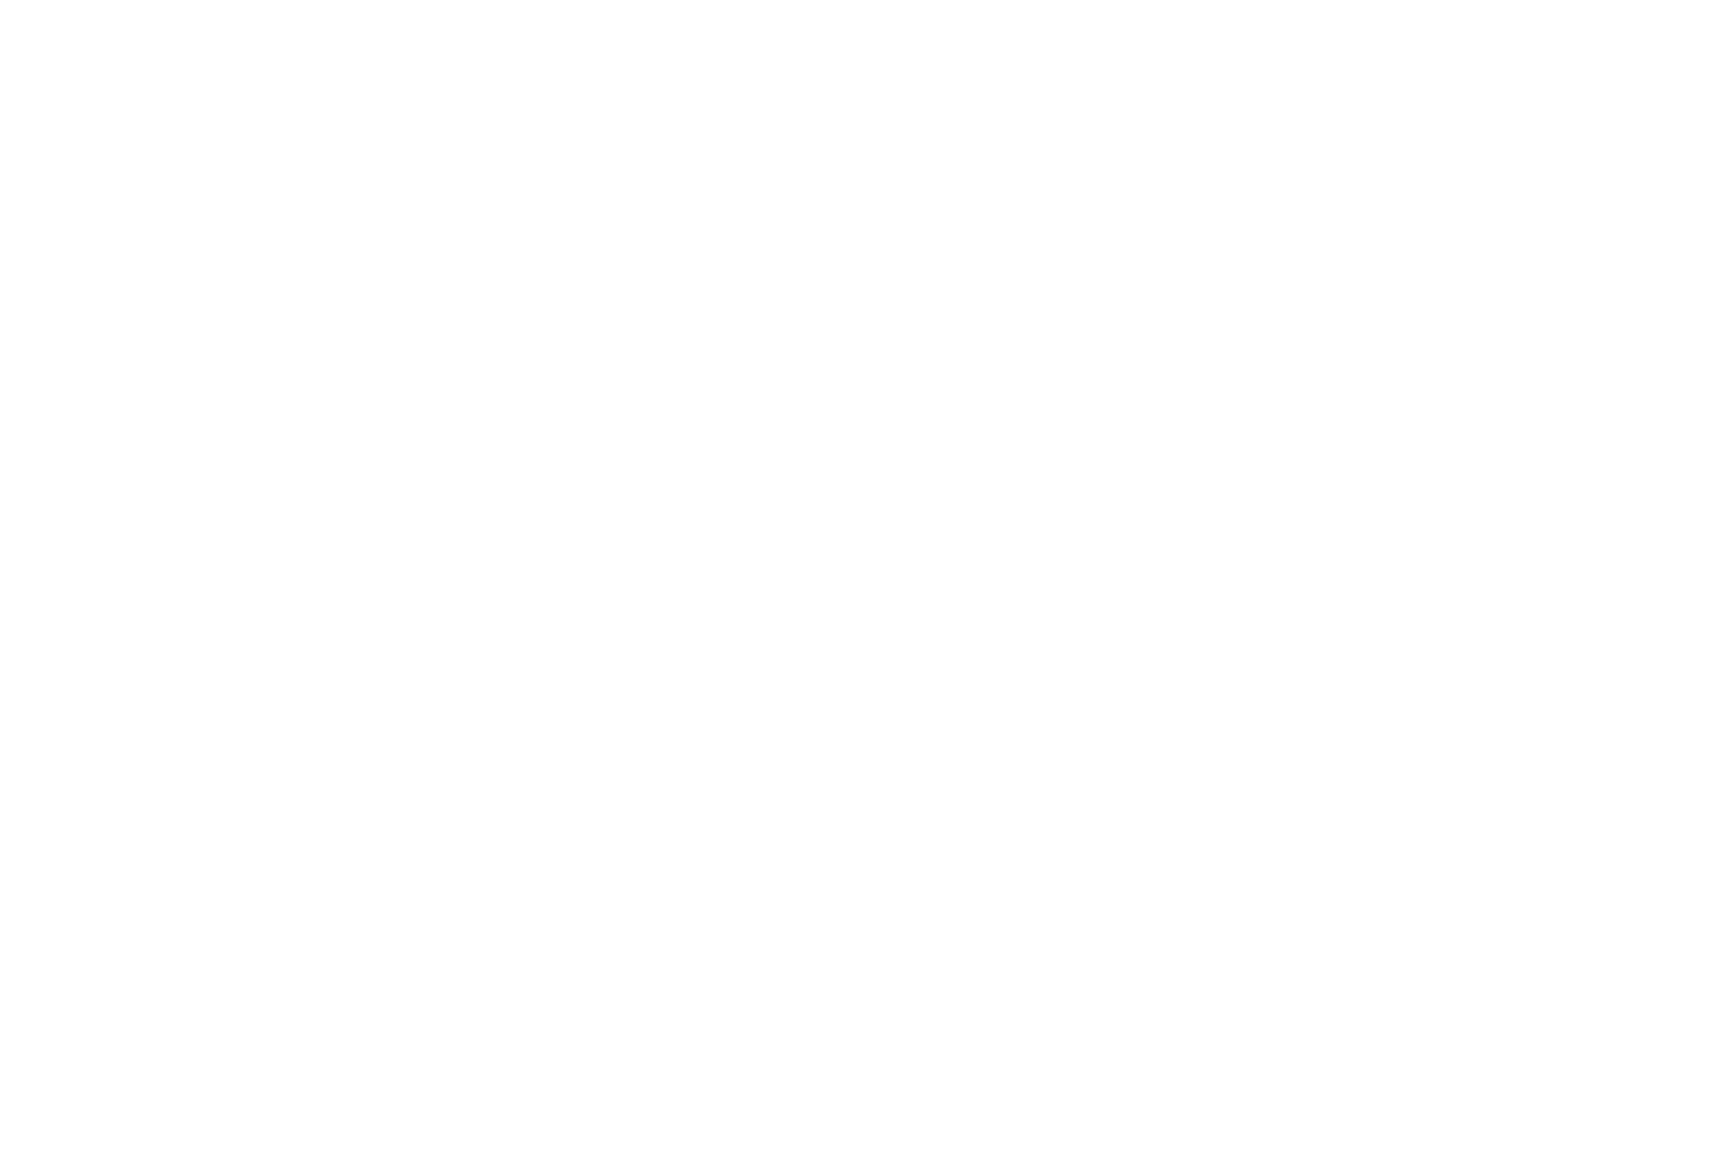 Script - Winner Royal Society of Television Motion Picture awards 2022